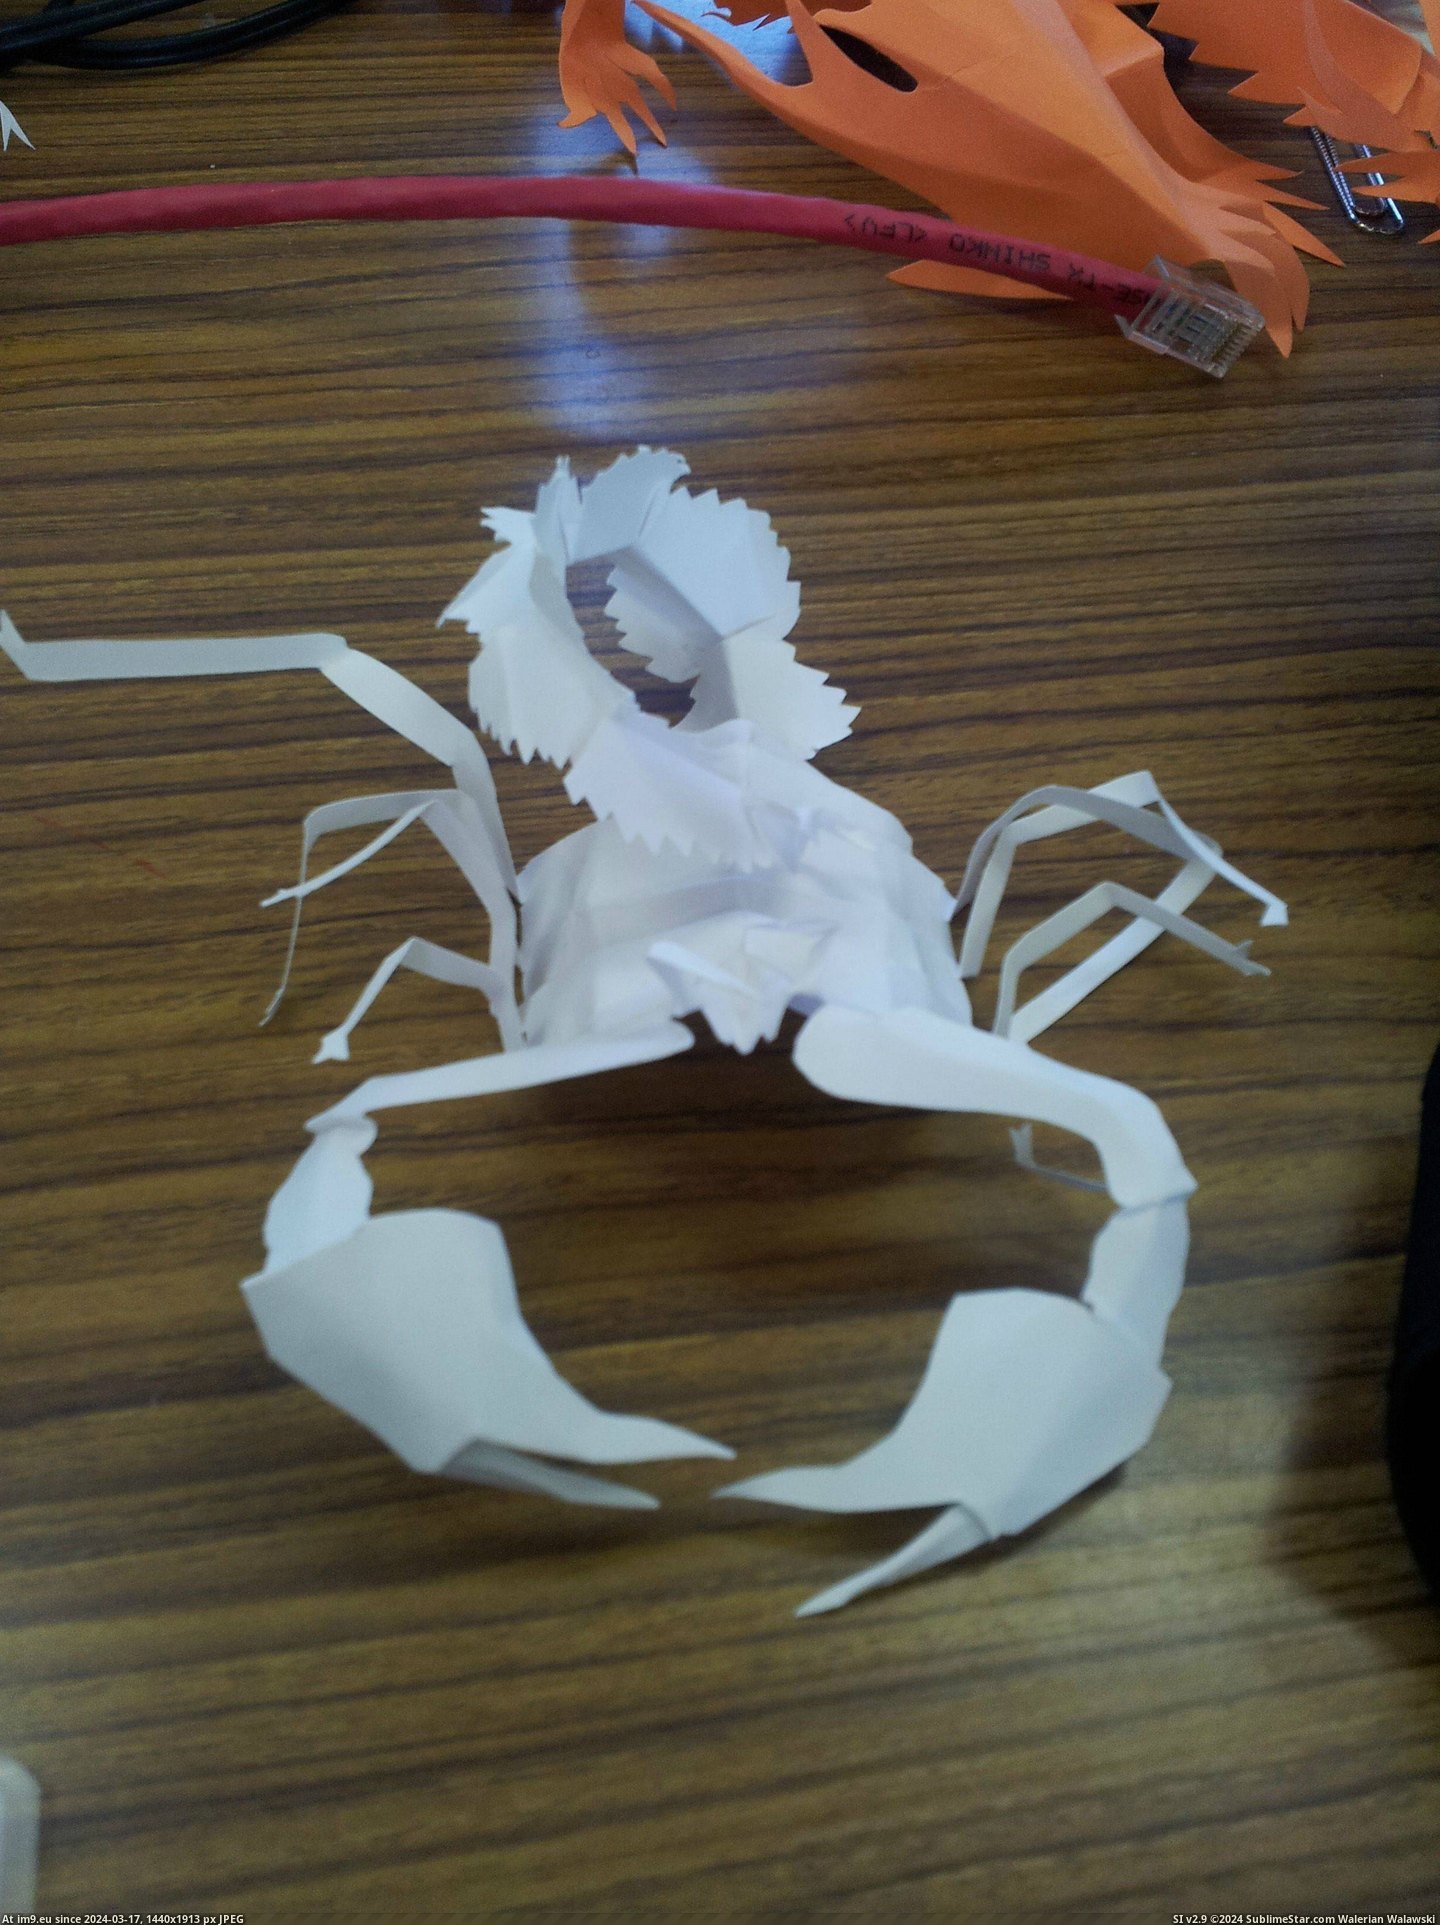 #One #Paper #Students #Creatures #Freehand #Bored #Completely [Pics] One of my students makes these creatures out of paper completely freehand whenever he is bored 7 Pic. (Obraz z album My r/PICS favs))